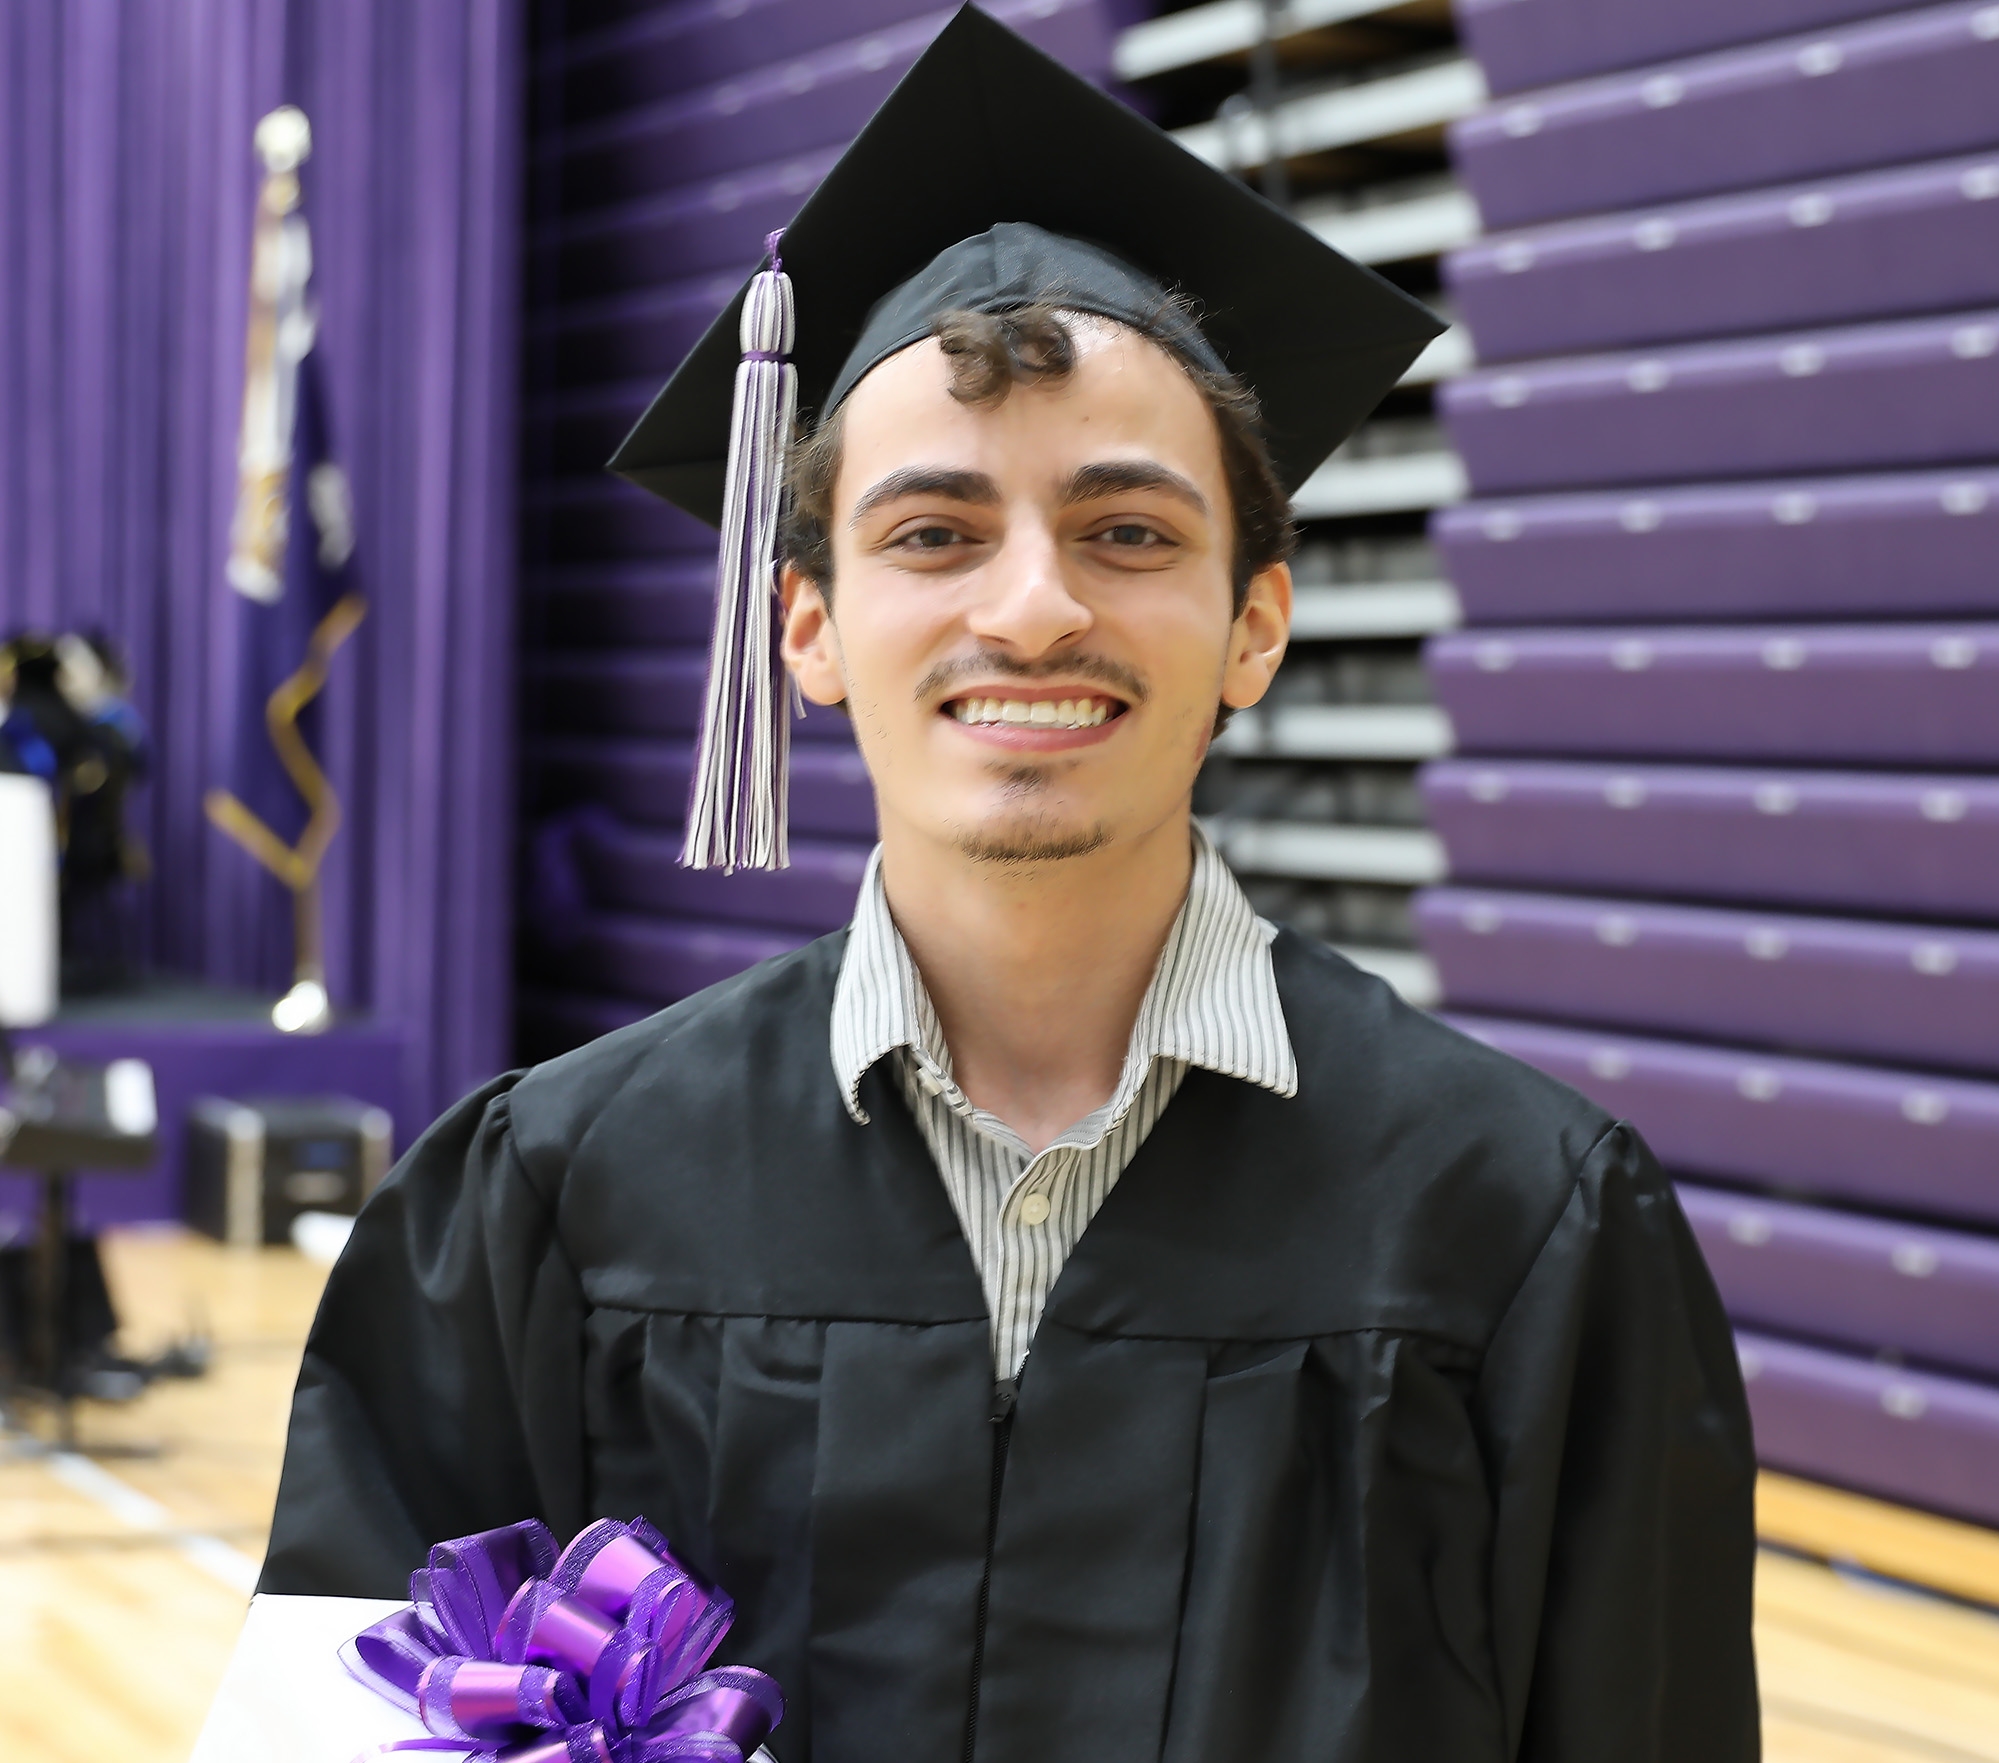 diaz palma in cap and gown with gift